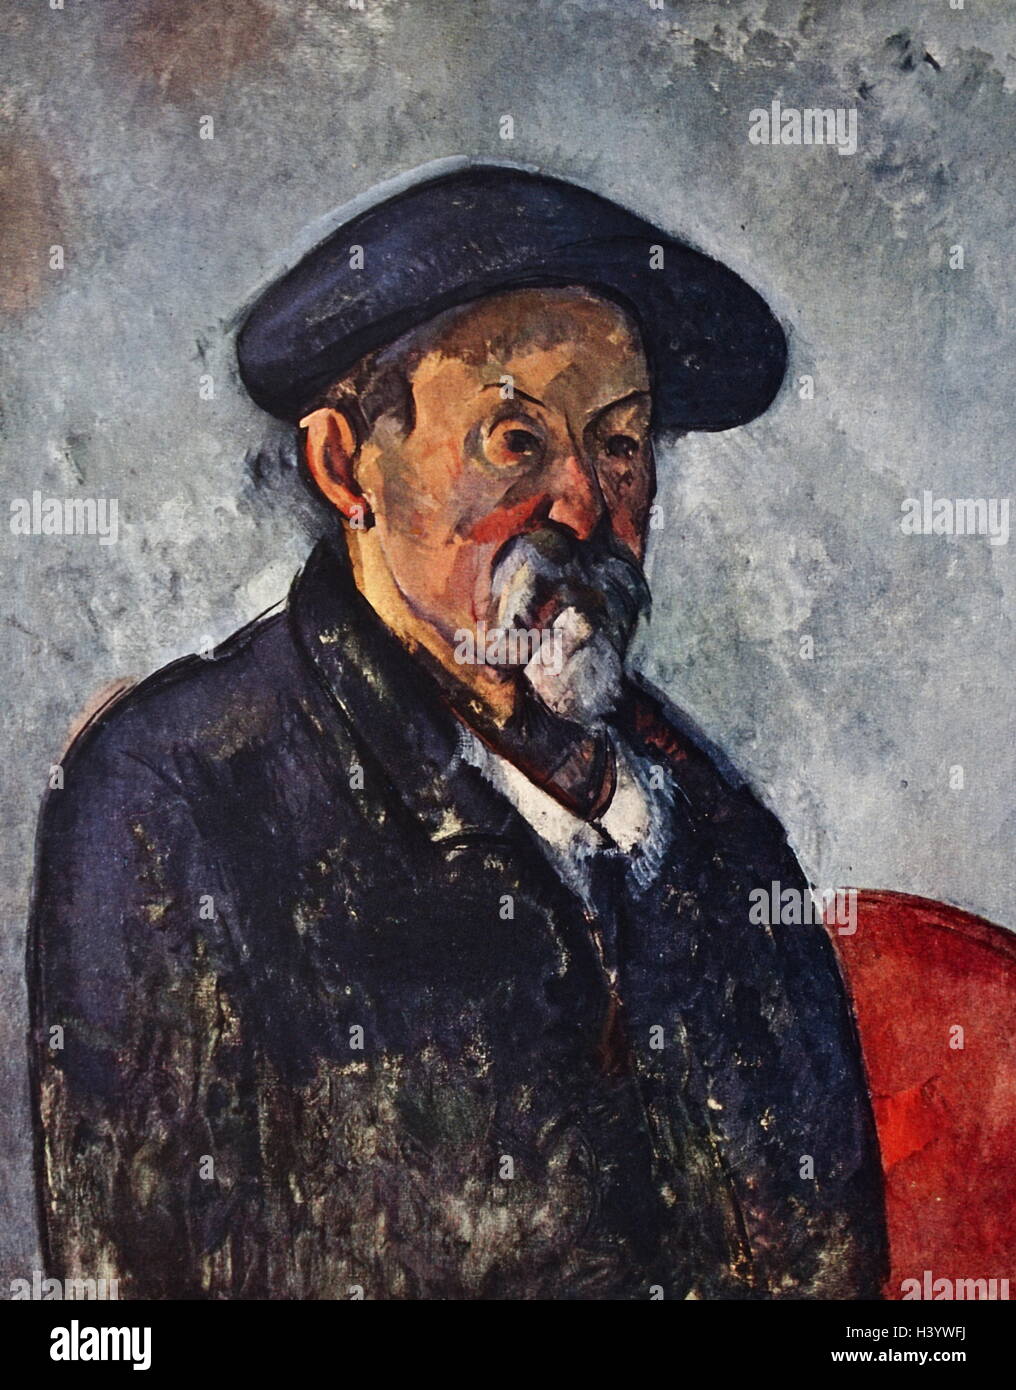 Self-portrait by Paul Cézanne (1839-1906) a French artist and post-impressionist painter. Dated 20th Century Stock Photo